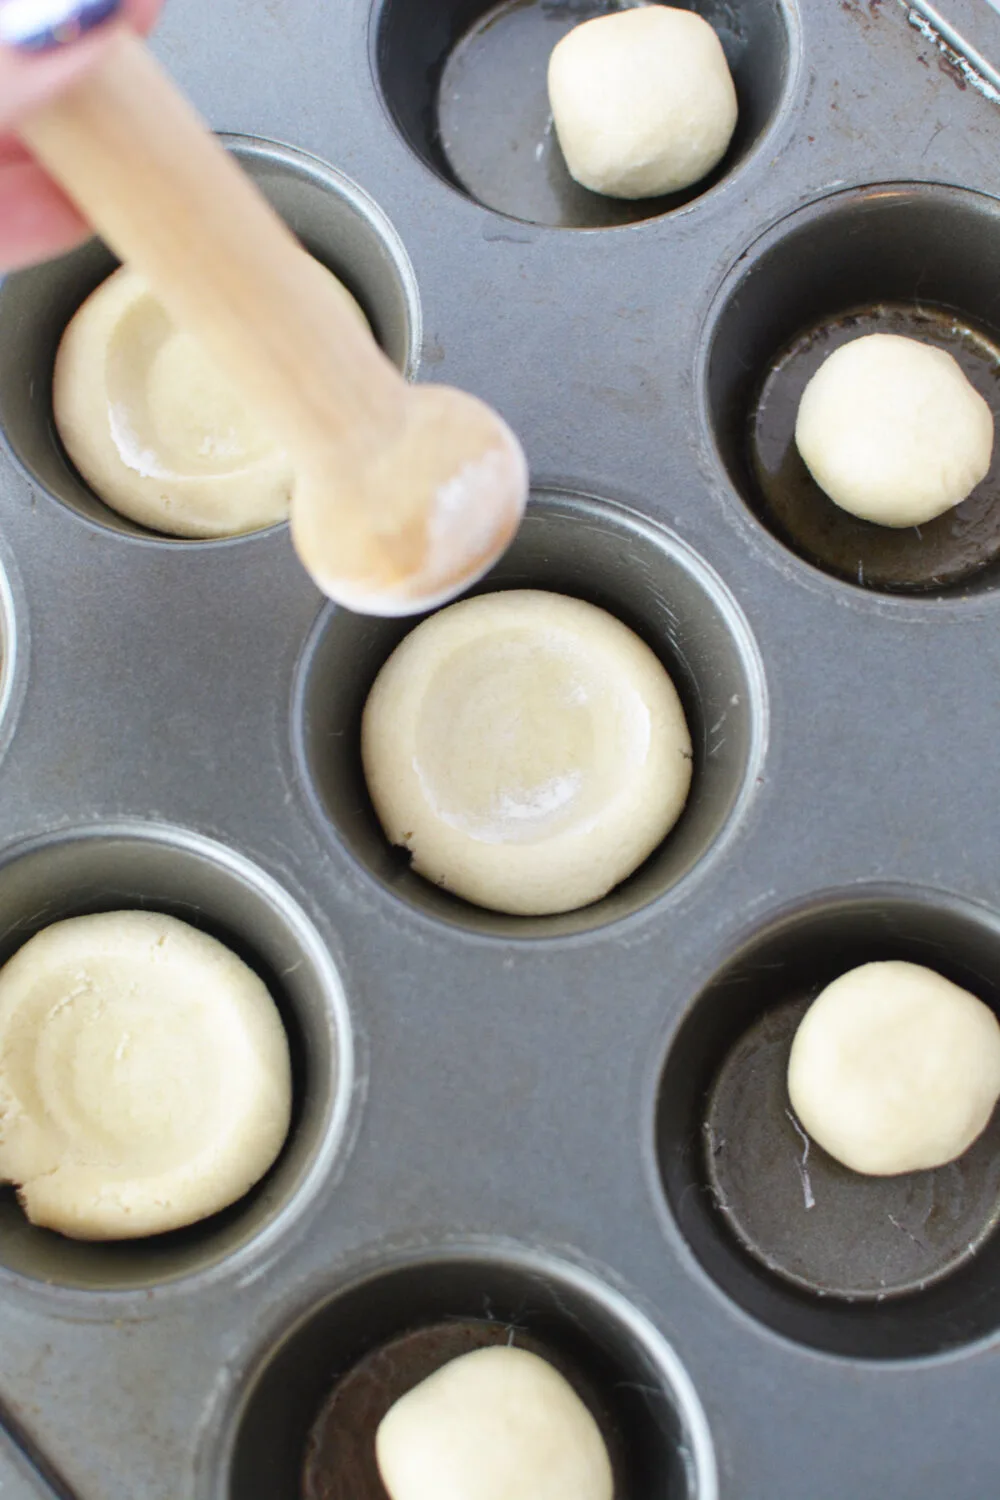 Sugar cookie dough in a muffin tin with a tart shaper being used.